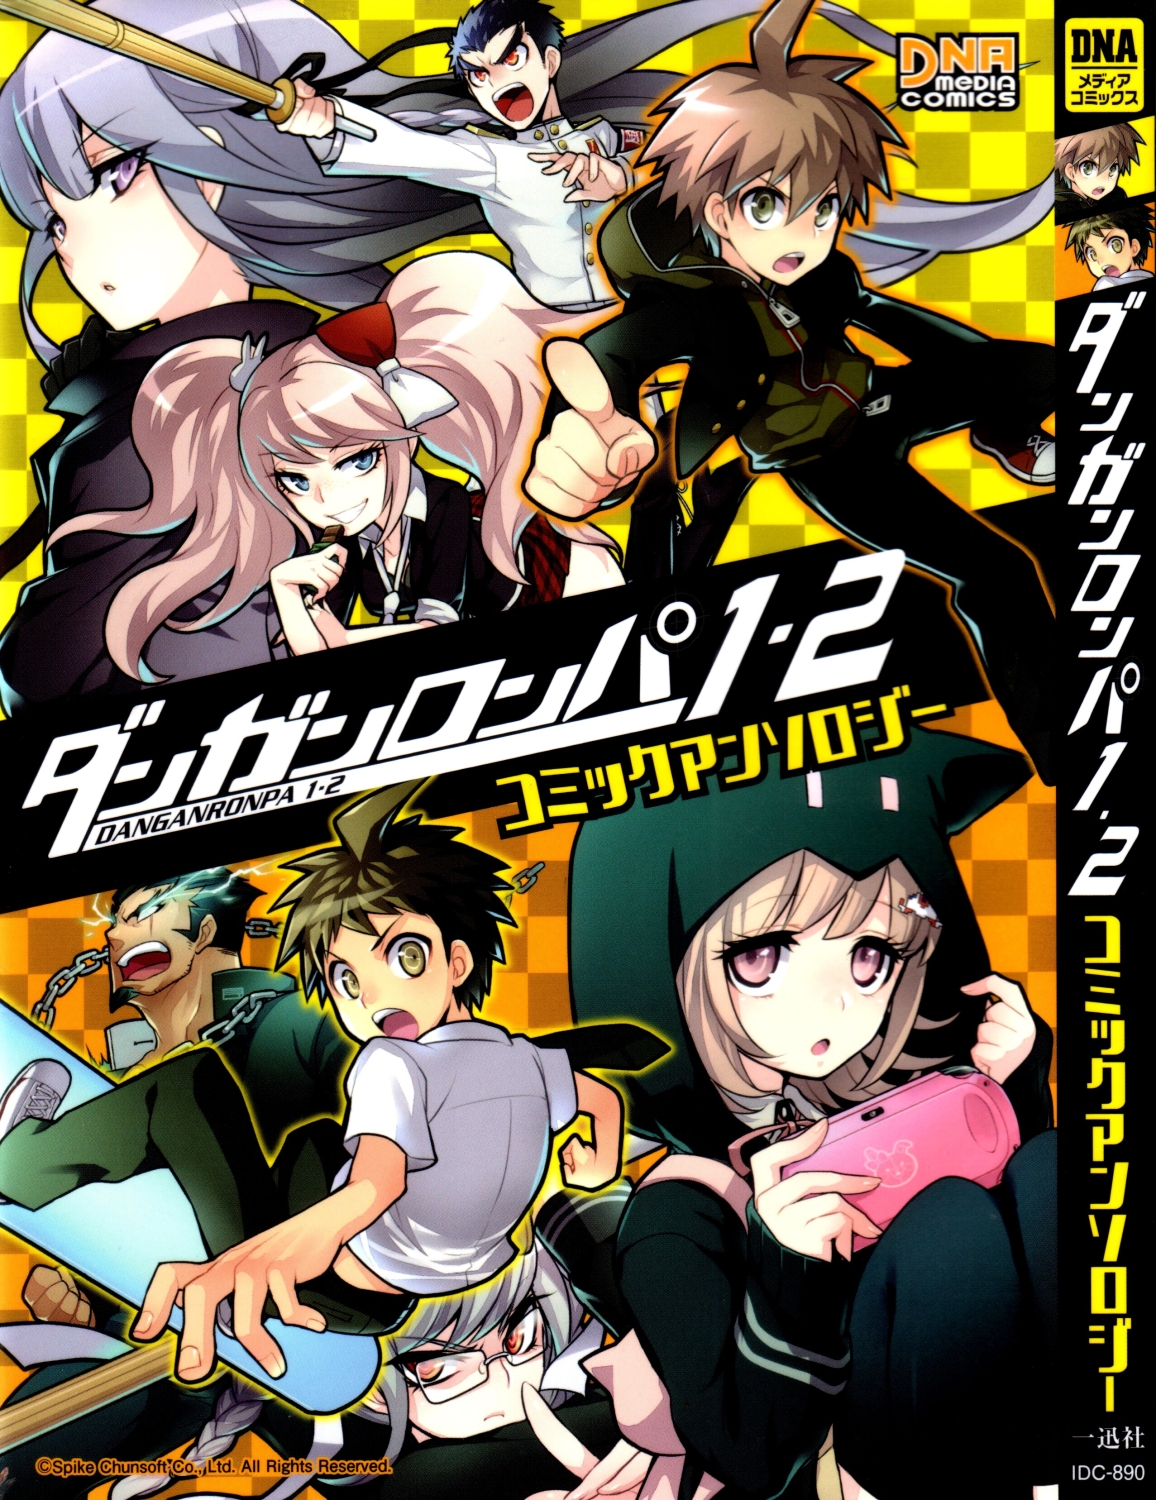 Danganronpa 1&2 Comic Anthology Vol. 1 Ch. 1 That Age You Wanna Paint it Black and White by Secco